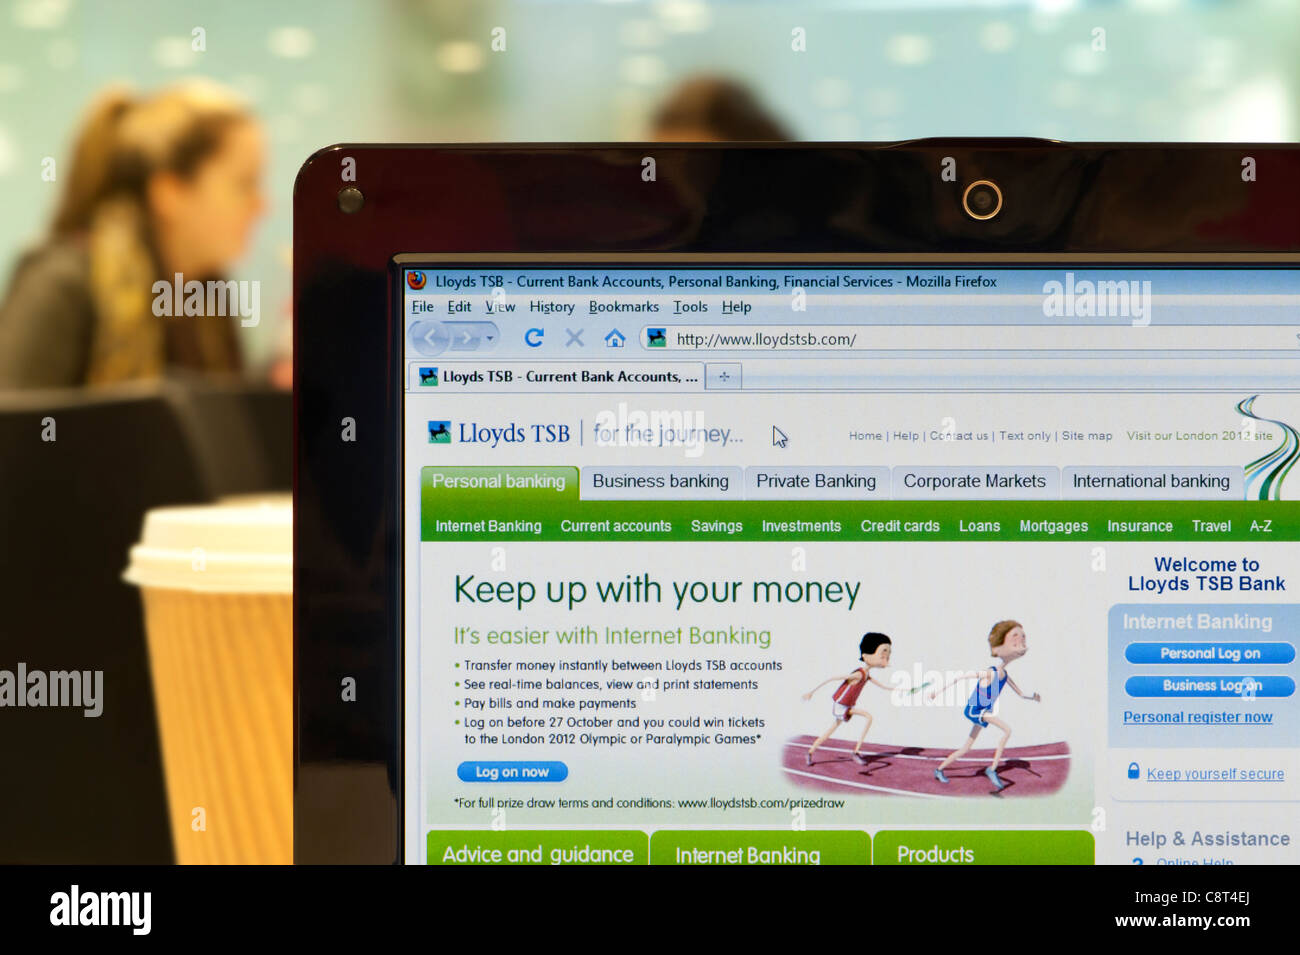 The Lloyds TSB website shot in a coffee shop environment (Editorial use only: print, TV, e-book and editorial website). Stock Photo